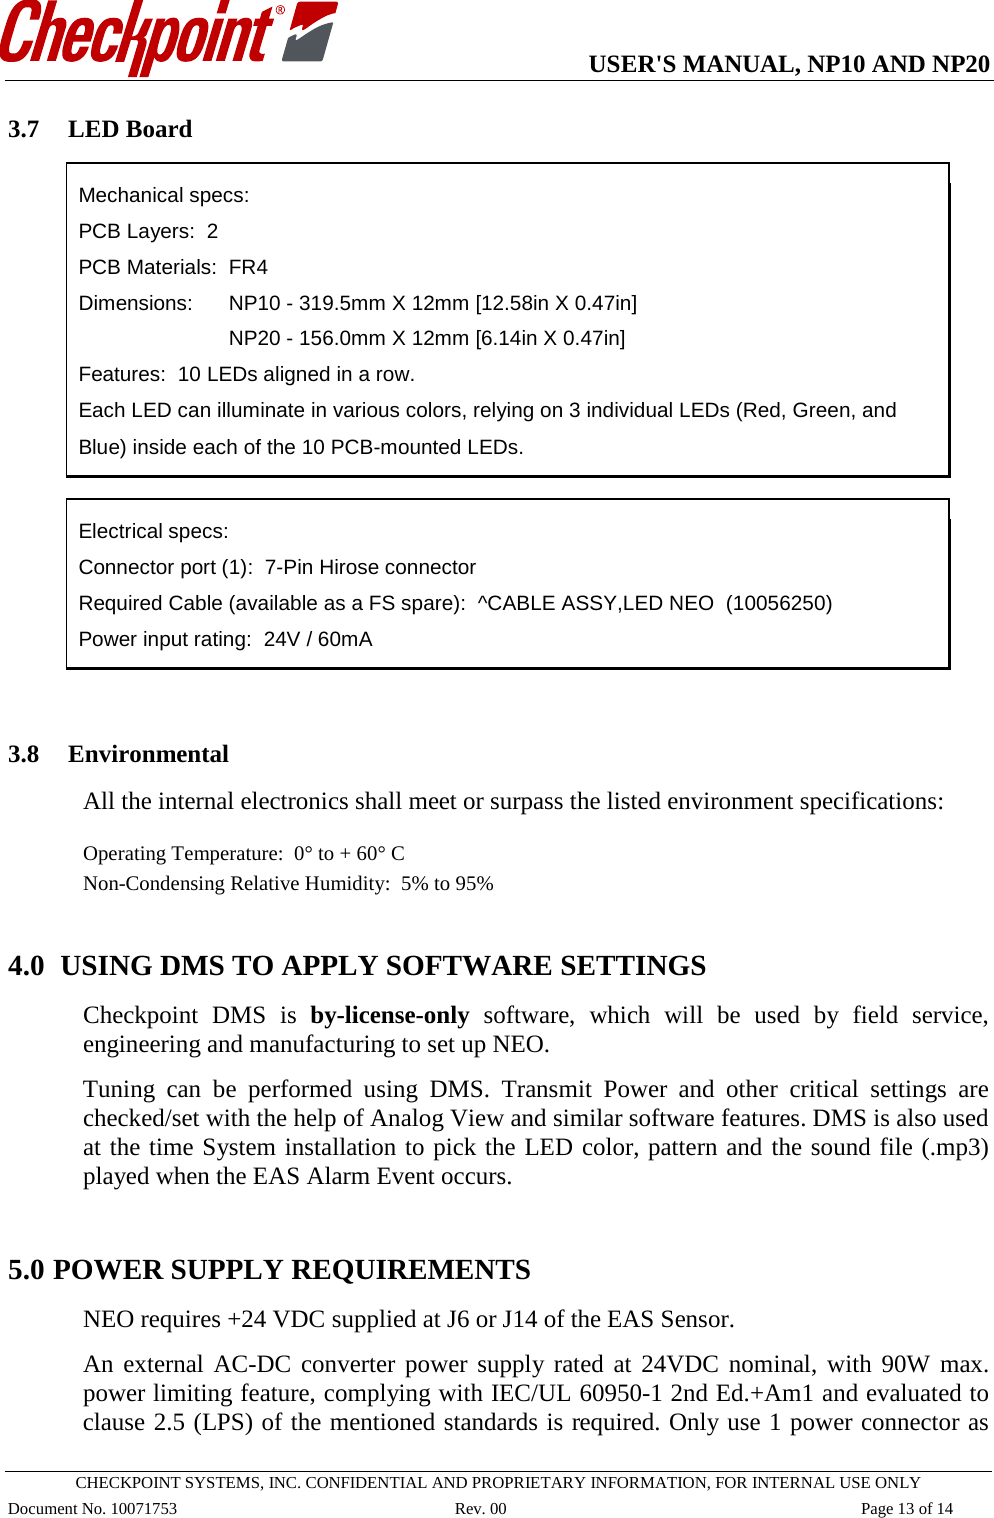   USER&apos;S MANUAL, NP10 AND NP20   CHECKPOINT SYSTEMS, INC. CONFIDENTIAL AND PROPRIETARY INFORMATION, FOR INTERNAL USE ONLY Document No. 10071753 Rev. 00 Page 13 of 14 3.7 LED Board  Mechanical specs: PCB Layers:  2  PCB Materials:  FR4 Dimensions: NP10 - 319.5mm X 12mm [12.58in X 0.47in]      NP20 - 156.0mm X 12mm [6.14in X 0.47in] Features:  10 LEDs aligned in a row. Each LED can illuminate in various colors, relying on 3 individual LEDs (Red, Green, and Blue) inside each of the 10 PCB-mounted LEDs.   Electrical specs: Connector port (1):  7-Pin Hirose connector Required Cable (available as a FS spare):  ^CABLE ASSY,LED NEO  (10056250) Power input rating:  24V / 60mA   3.8 Environmental   All the internal electronics shall meet or surpass the listed environment specifications:  Operating Temperature:  0° to + 60° C Non-Condensing Relative Humidity:  5% to 95%  4.0  USING DMS TO APPLY SOFTWARE SETTINGS Checkpoint DMS is by-license-only software, which will be used by field service, engineering and manufacturing to set up NEO. Tuning  can be performed using DMS.  Transmit Power and other critical settings are checked/set with the help of Analog View and similar software features. DMS is also used at the time System installation to pick the LED color, pattern and the sound file (.mp3) played when the EAS Alarm Event occurs.  5.0 POWER SUPPLY REQUIREMENTS NEO requires +24 VDC supplied at J6 or J14 of the EAS Sensor.  An external AC-DC converter power supply rated at 24VDC nominal, with 90W max. power limiting feature, complying with IEC/UL 60950-1 2nd Ed.+Am1 and evaluated to clause 2.5 (LPS) of the mentioned standards is required. Only use 1 power connector as 